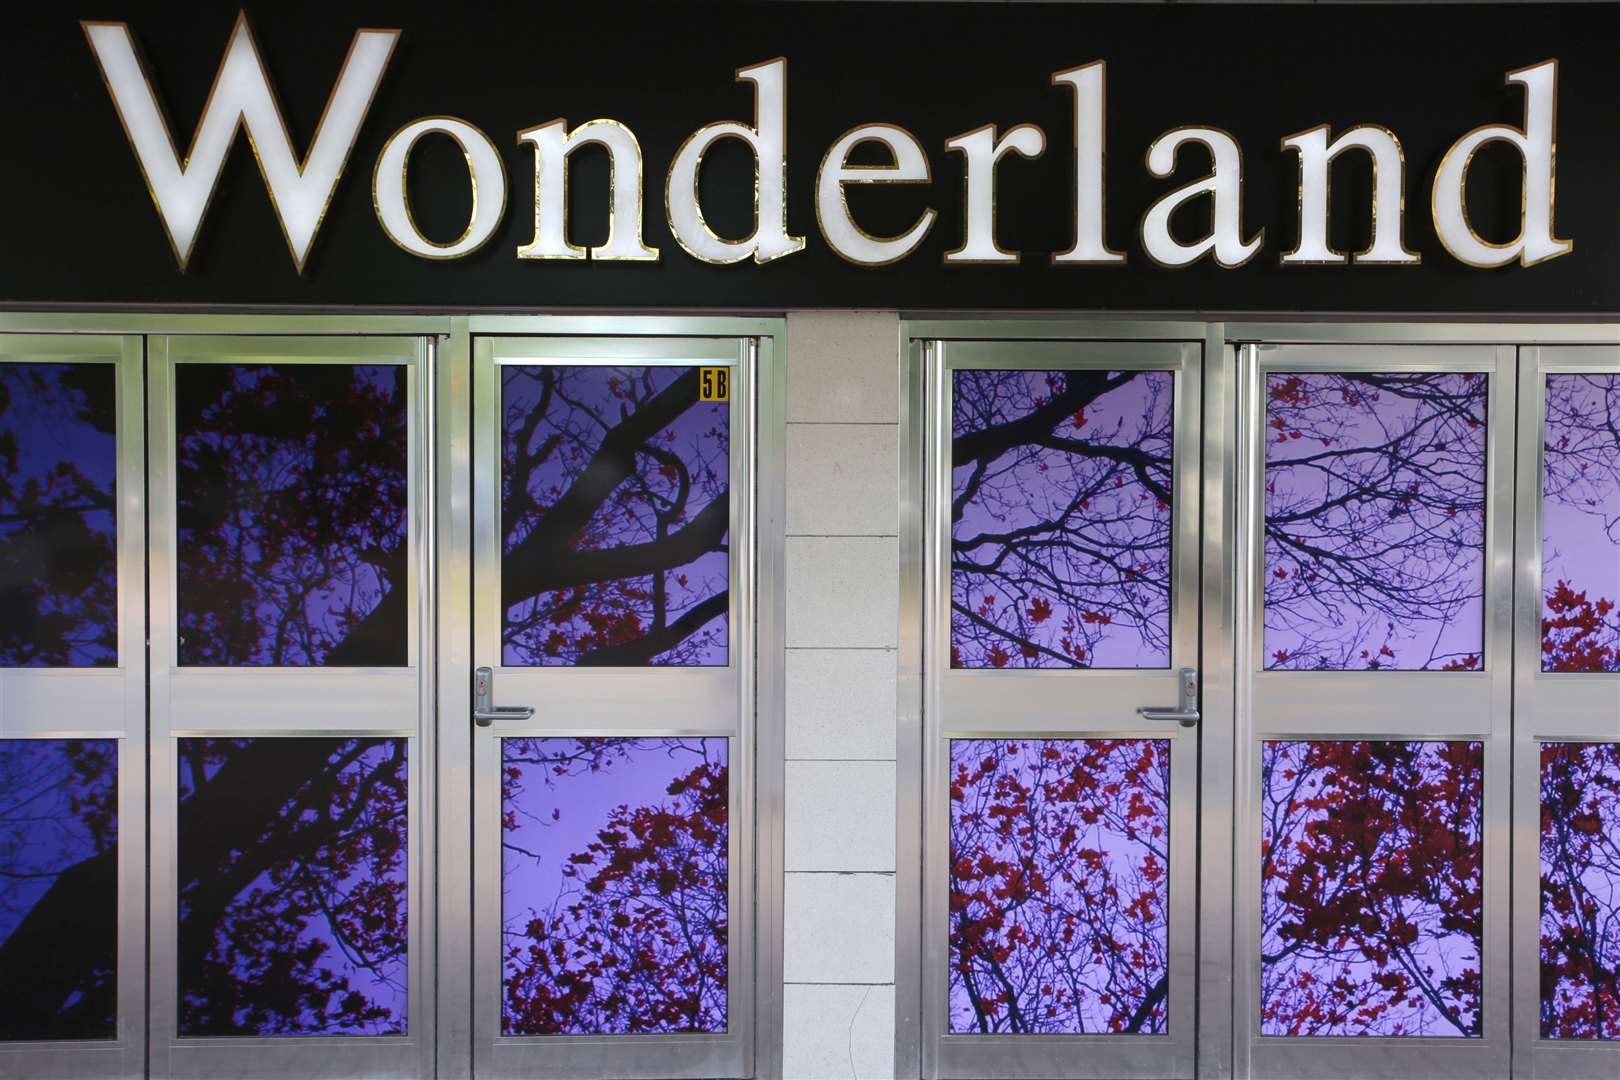 Wonderland, which now a trampoline park at Lockmeadow, Barker Road, Maidstone. Picture: Martin Apps